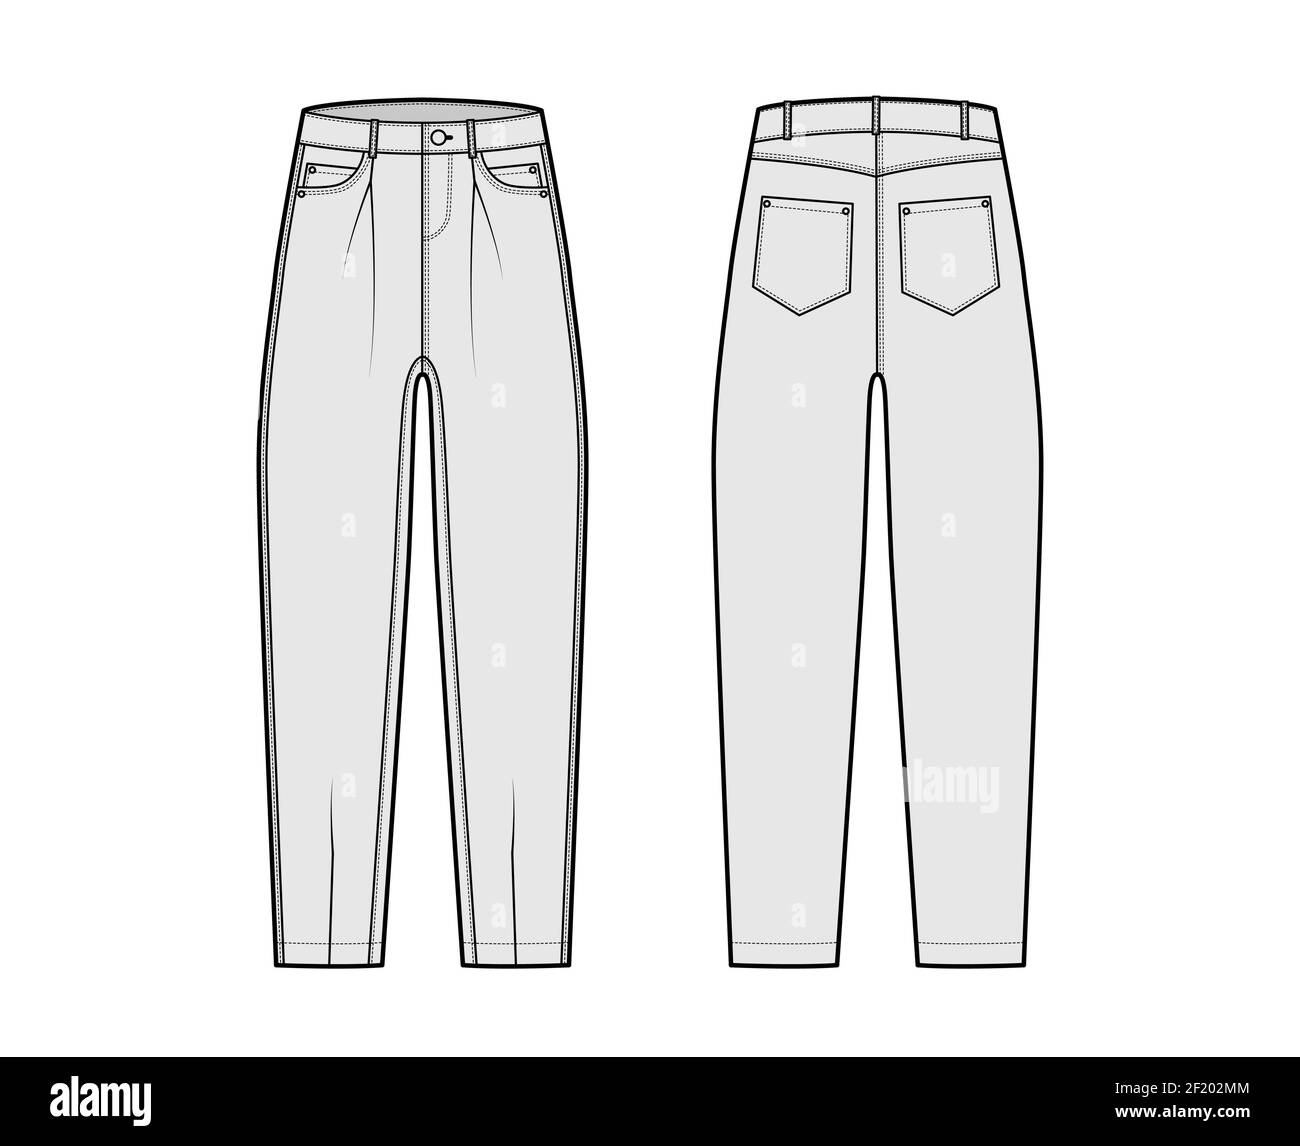 Slouchy Jeans Denim pants technical fashion illustration with full ...